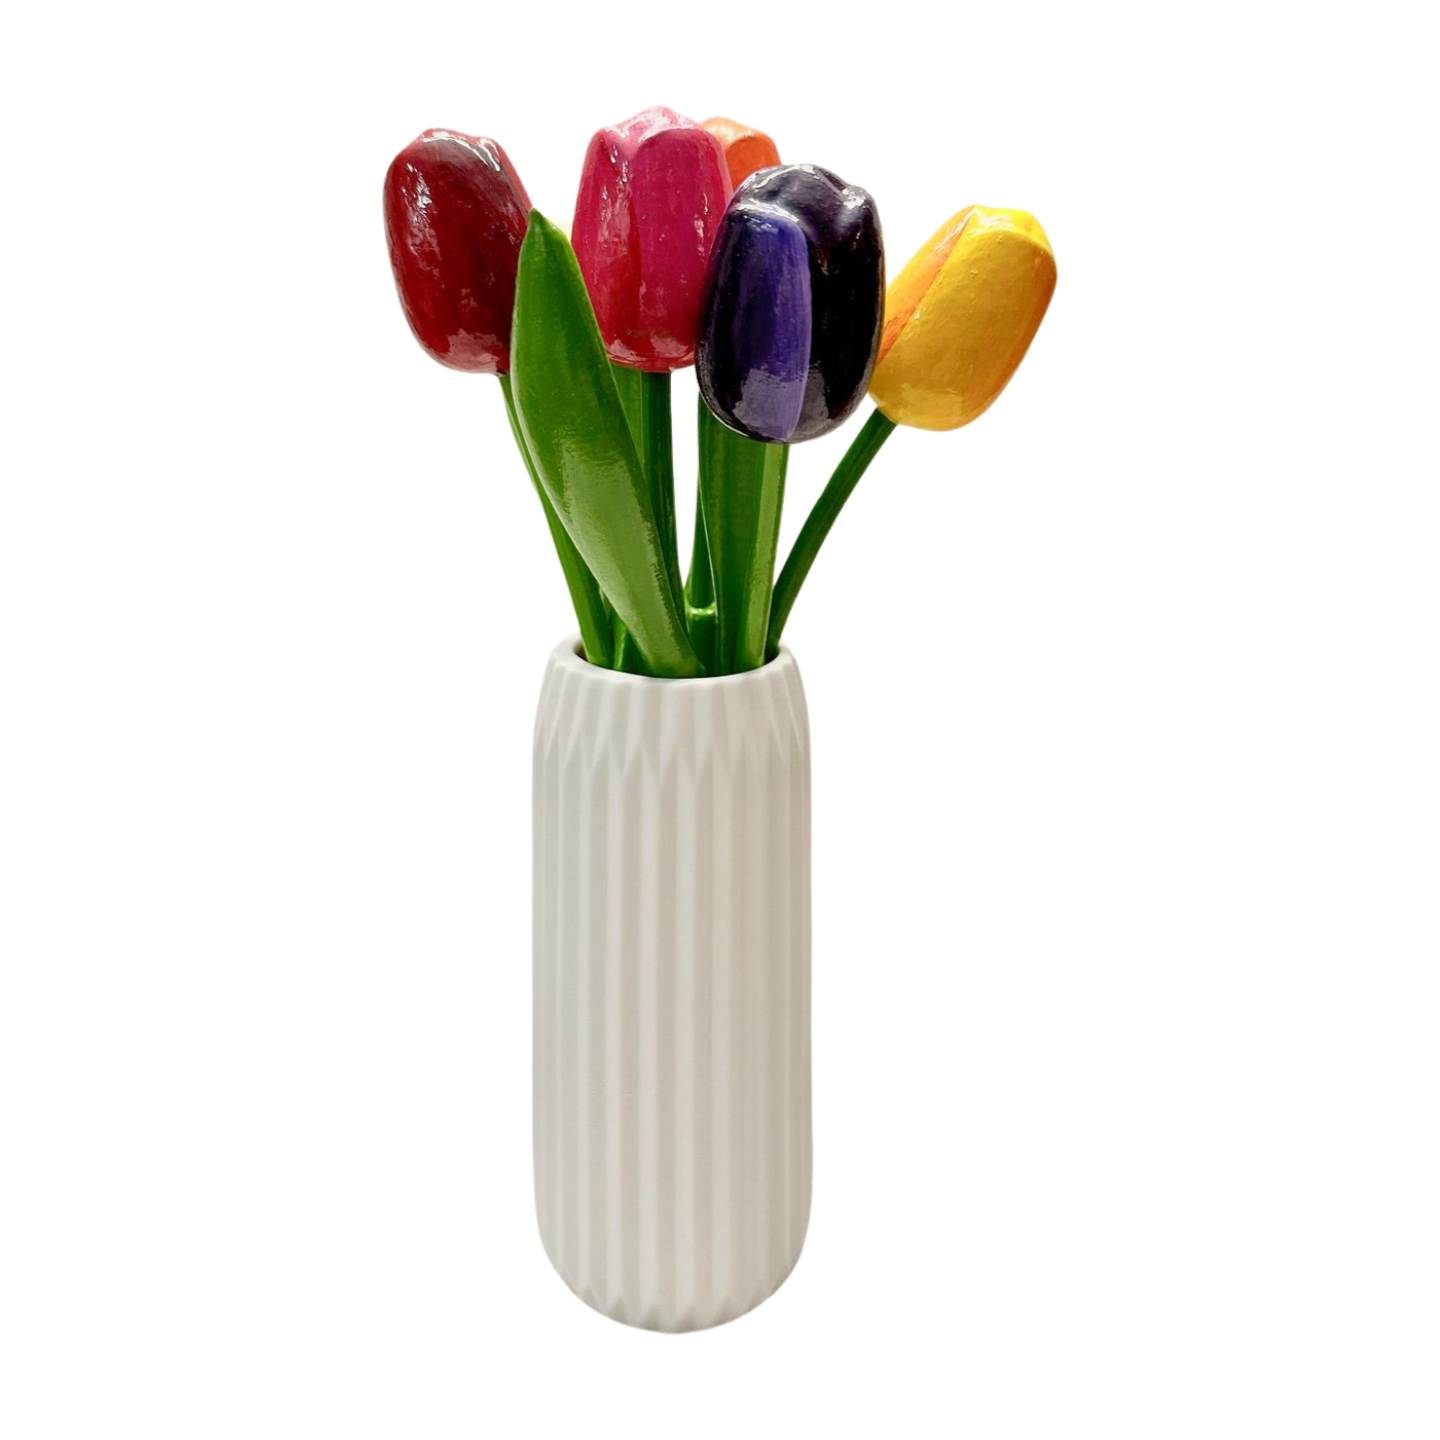 Wooden Dutch Tulips shown here in a vase, with all five of the six color variations.